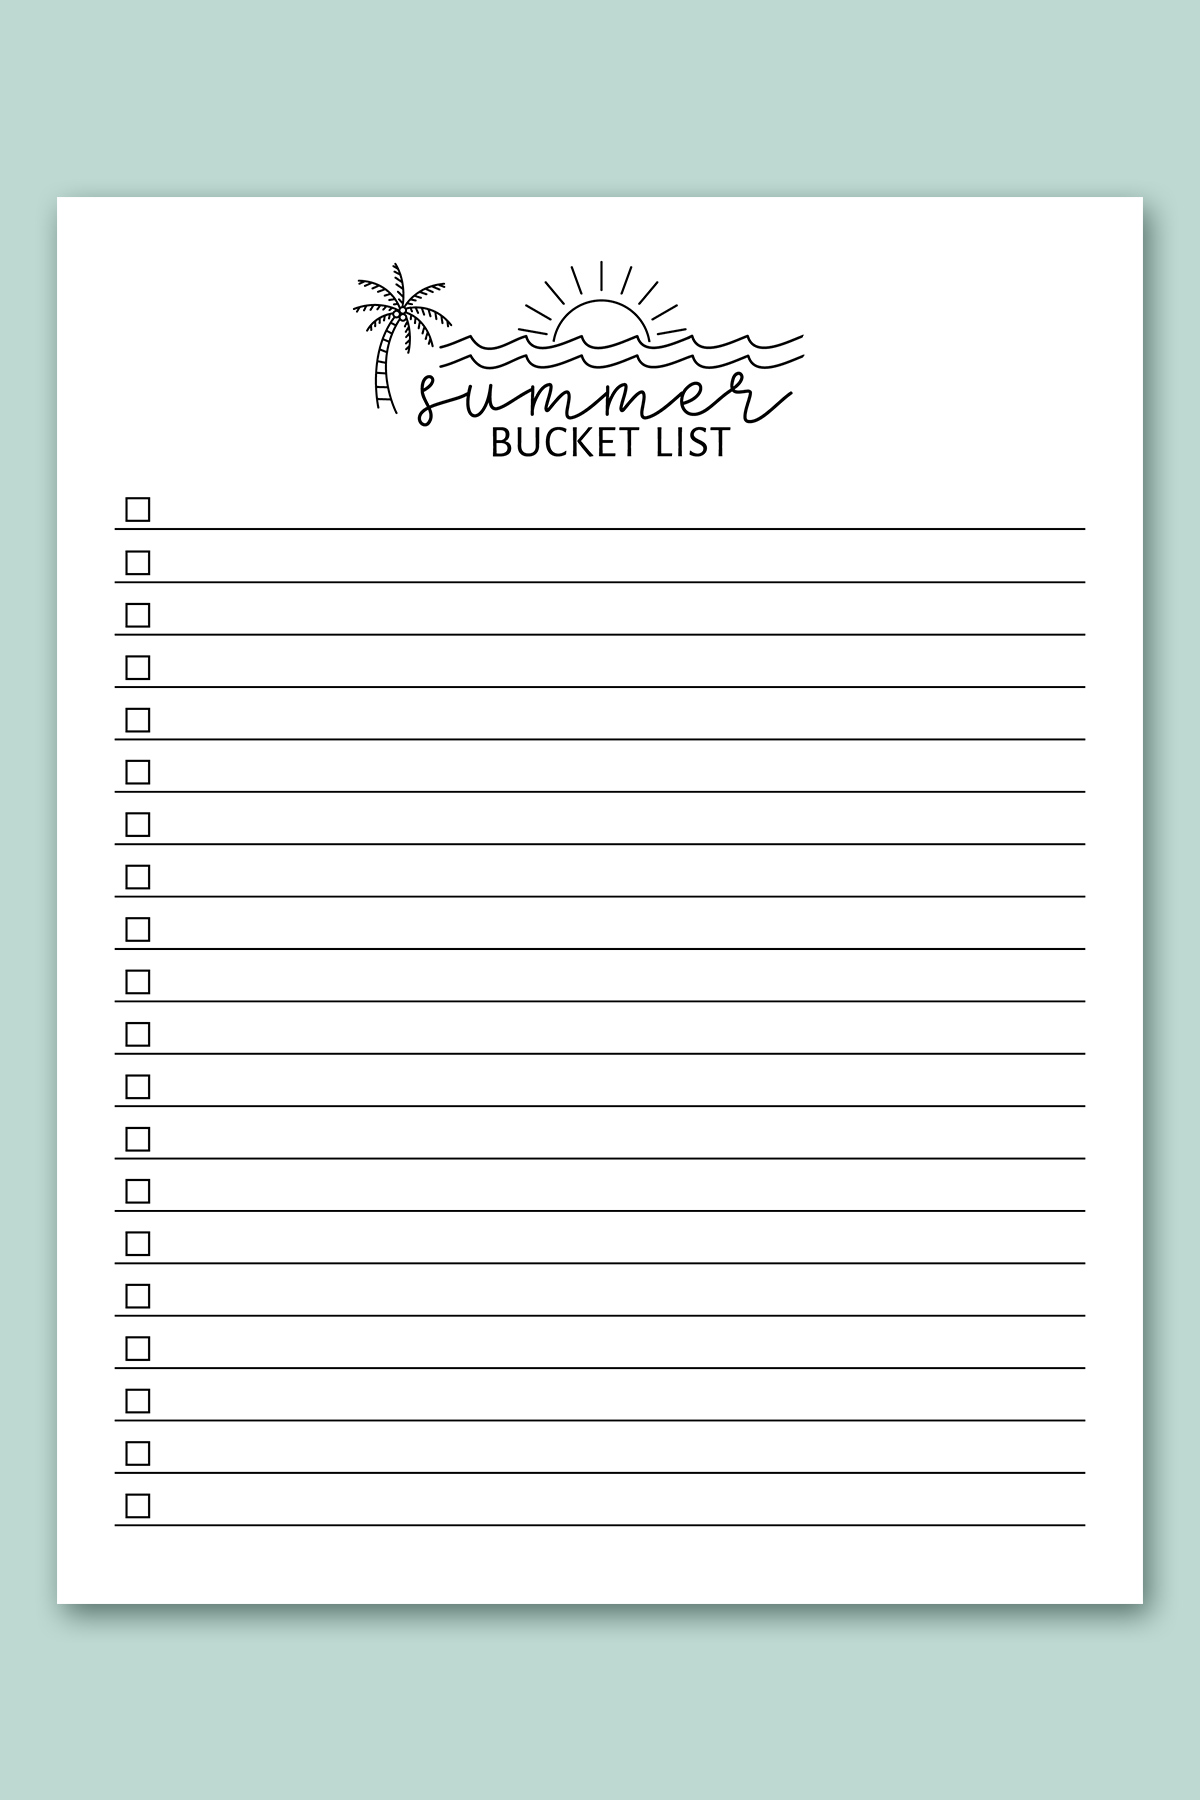 This image shows one of lists from the free bucket list printable set. This one is the summer bucket list printable.